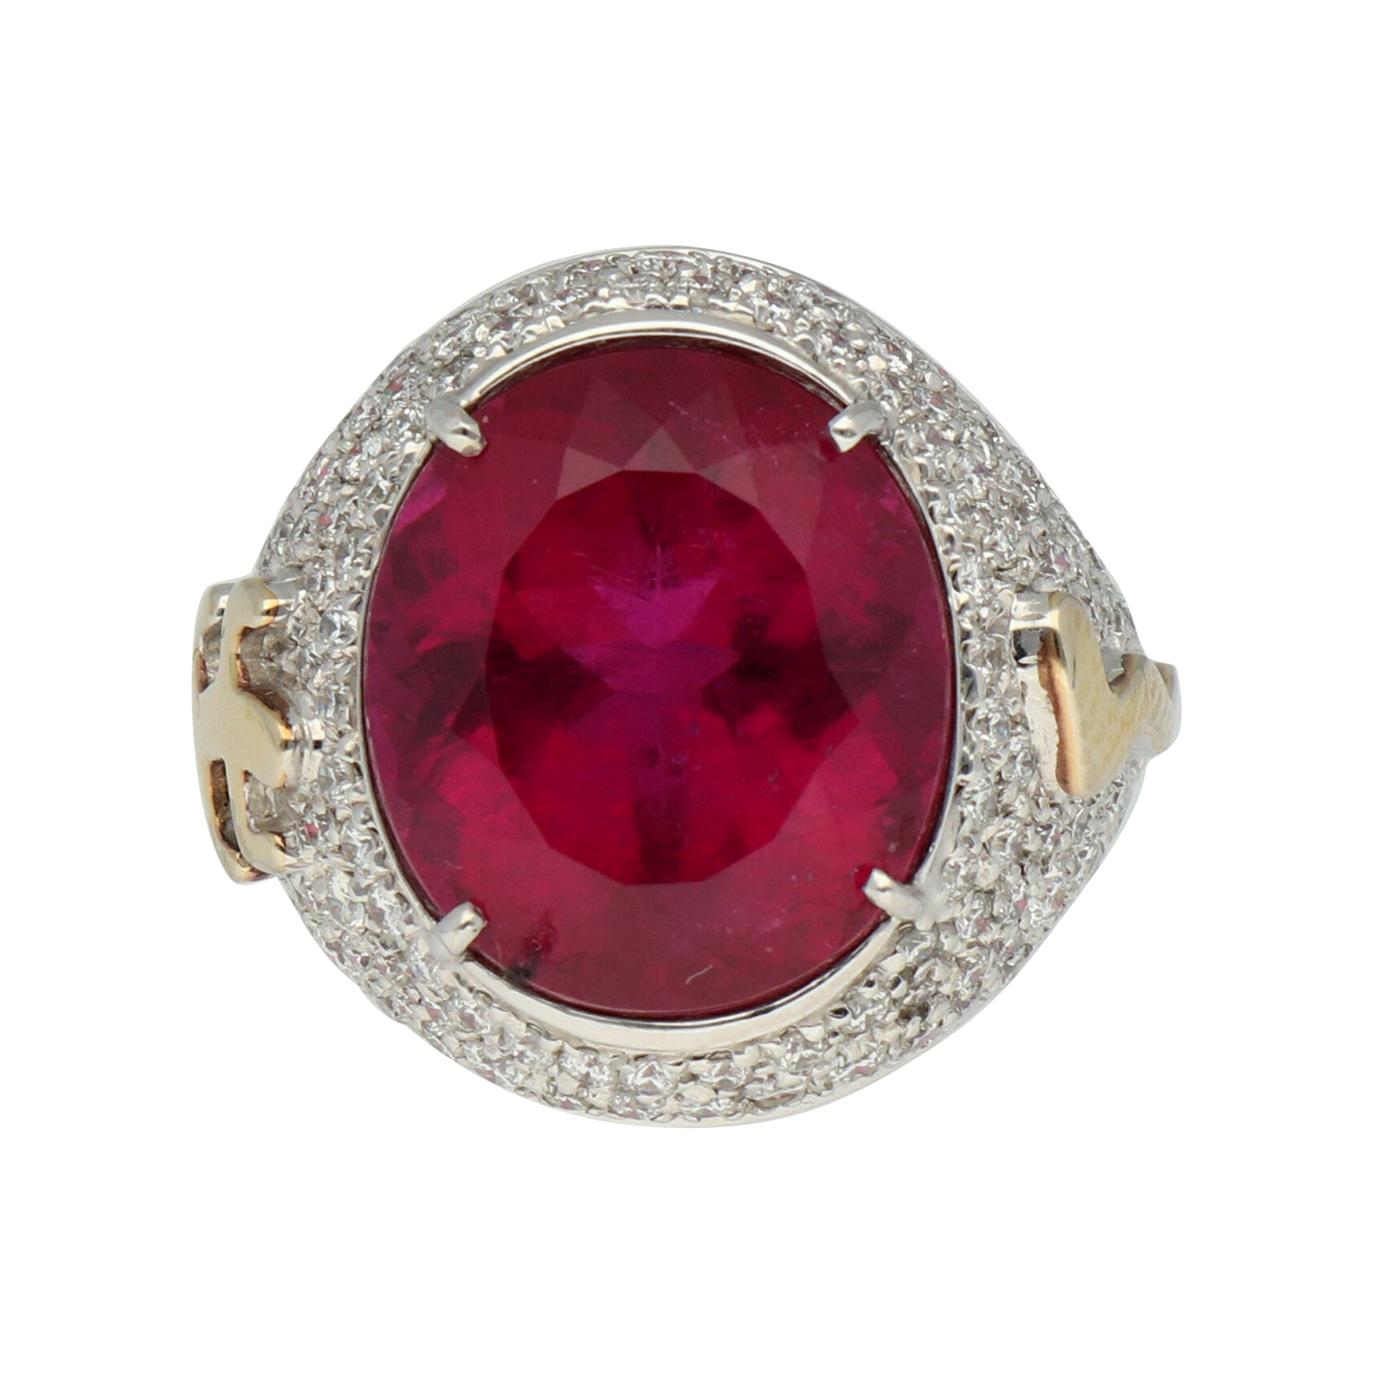 A Rubellite and pave diamonds mounted in an 18K White and Yellow Gold Cocktail Ring, belonging to the Desert collection.

Size US 6.5 - 53.1 mm 

Components:
18K white and yellow gold - 12.20 grams
Total diamonds weight - 1.66 carats G / VS 
1